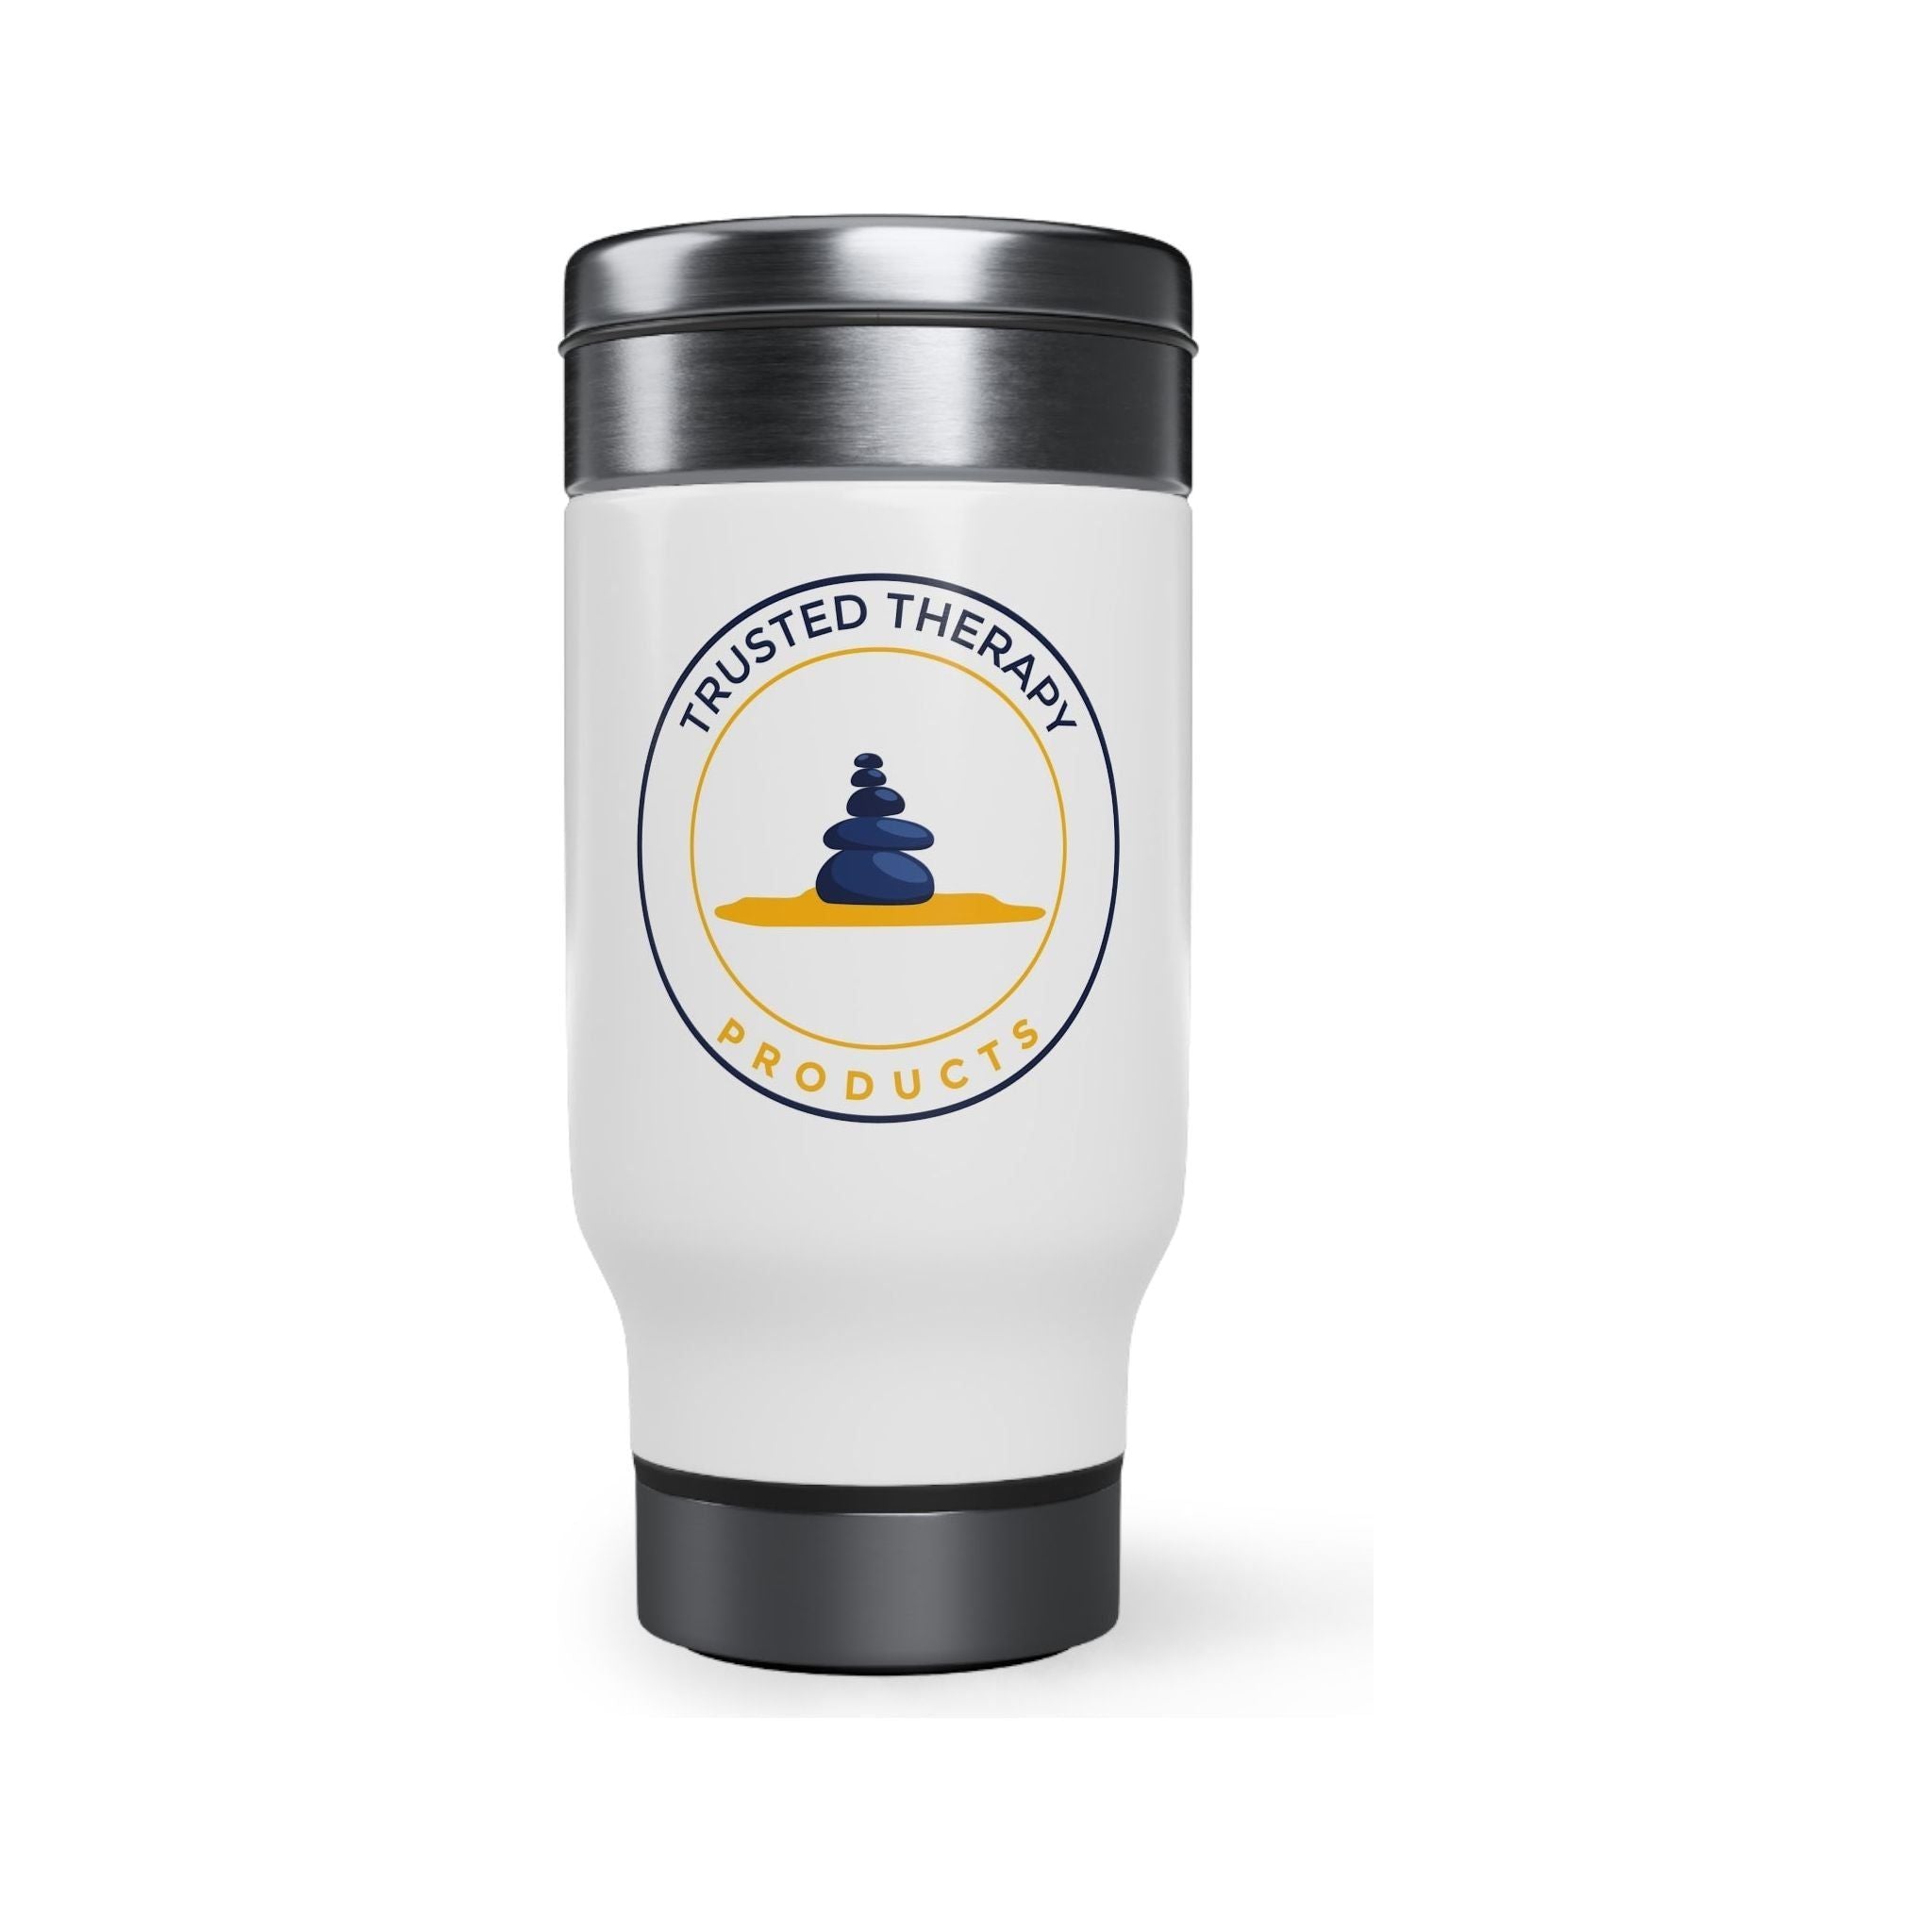 Stainless Steel Travel Mug with Handle